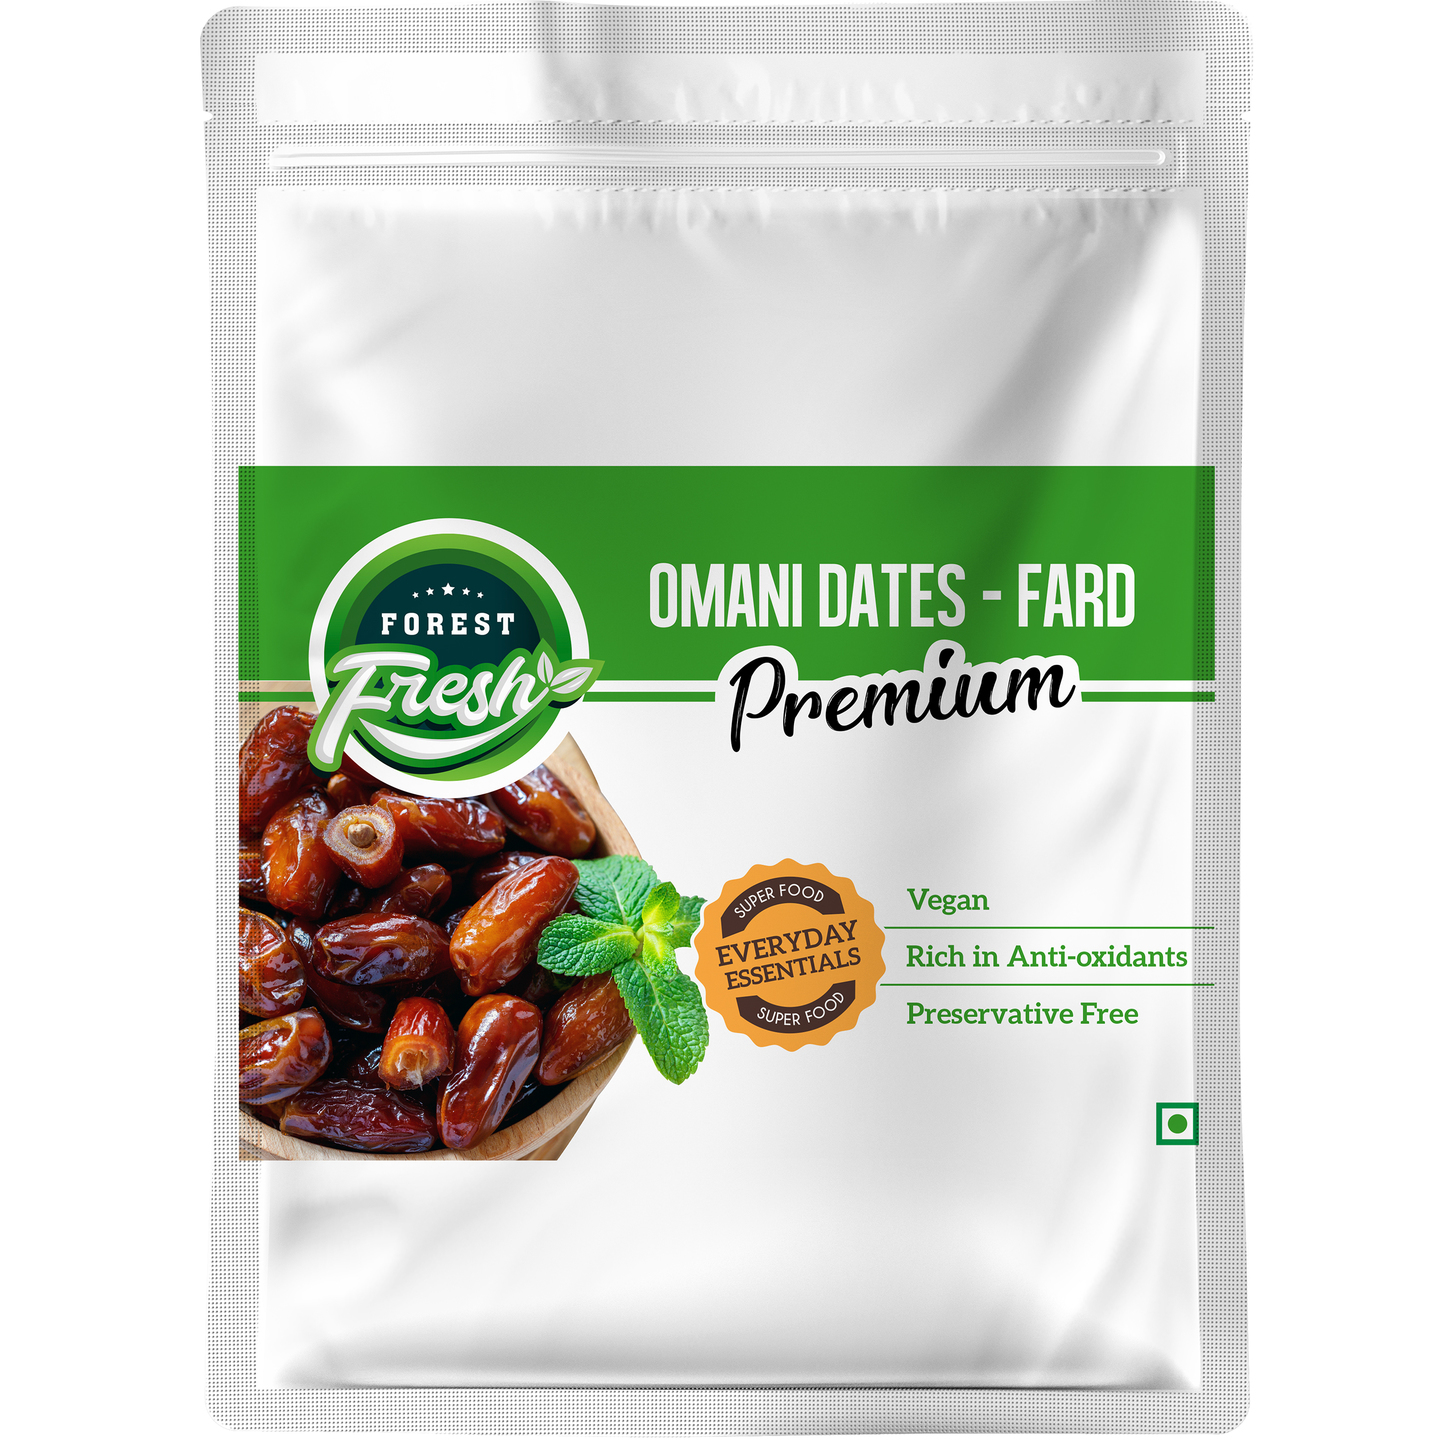 Forest Fresh 100 Natural - Premium Omani Dates Khajur - Fard - 400gm - Everyday Essential Superfood - Dry Fruits & Nuts - Rich in Antioxidants & Dietary Fiber - Preservative Free